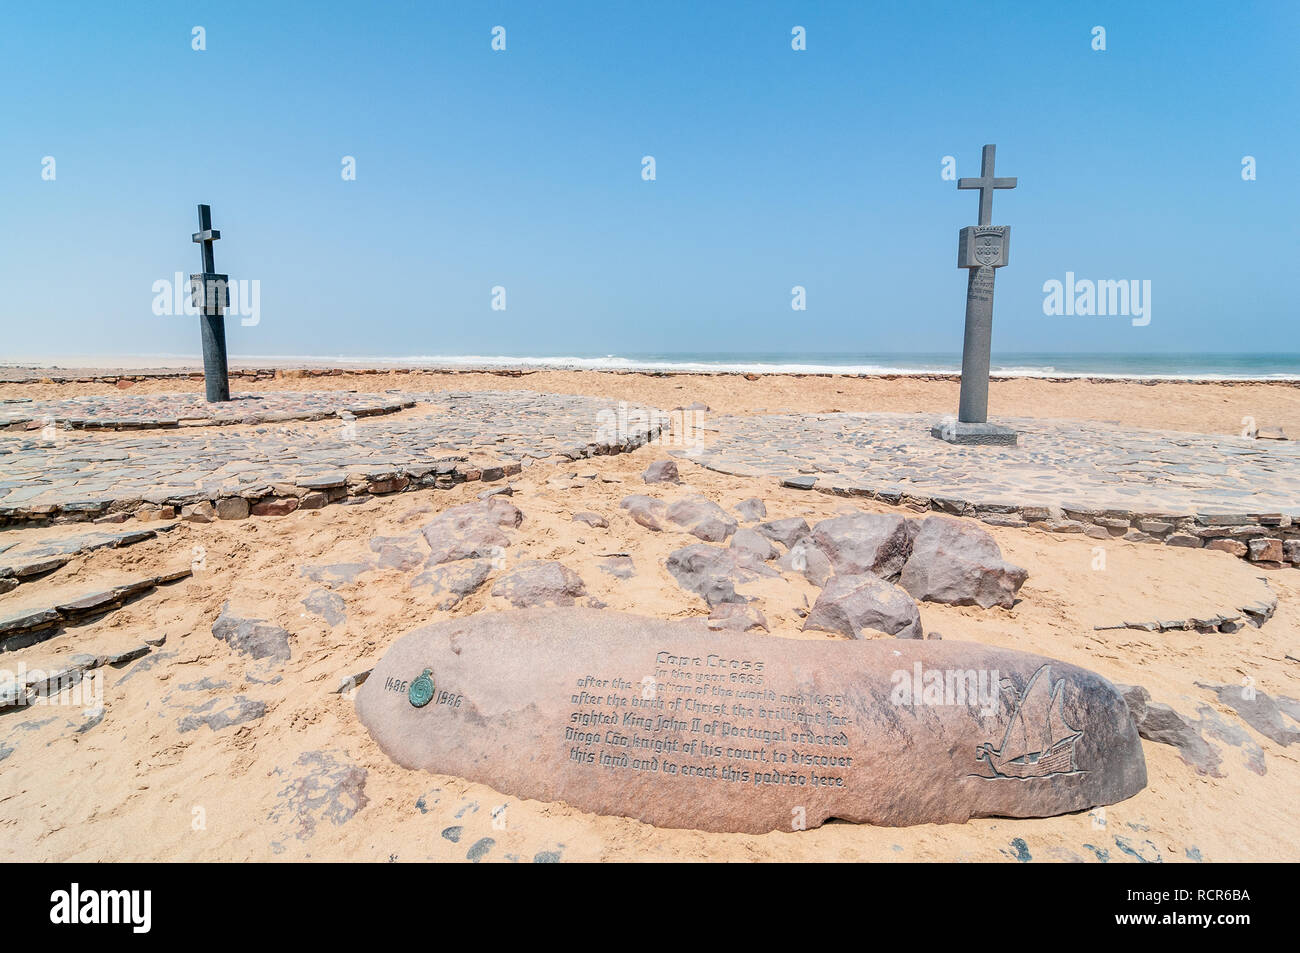 Cape cross seal reserve monument, Namibia Stock Photo